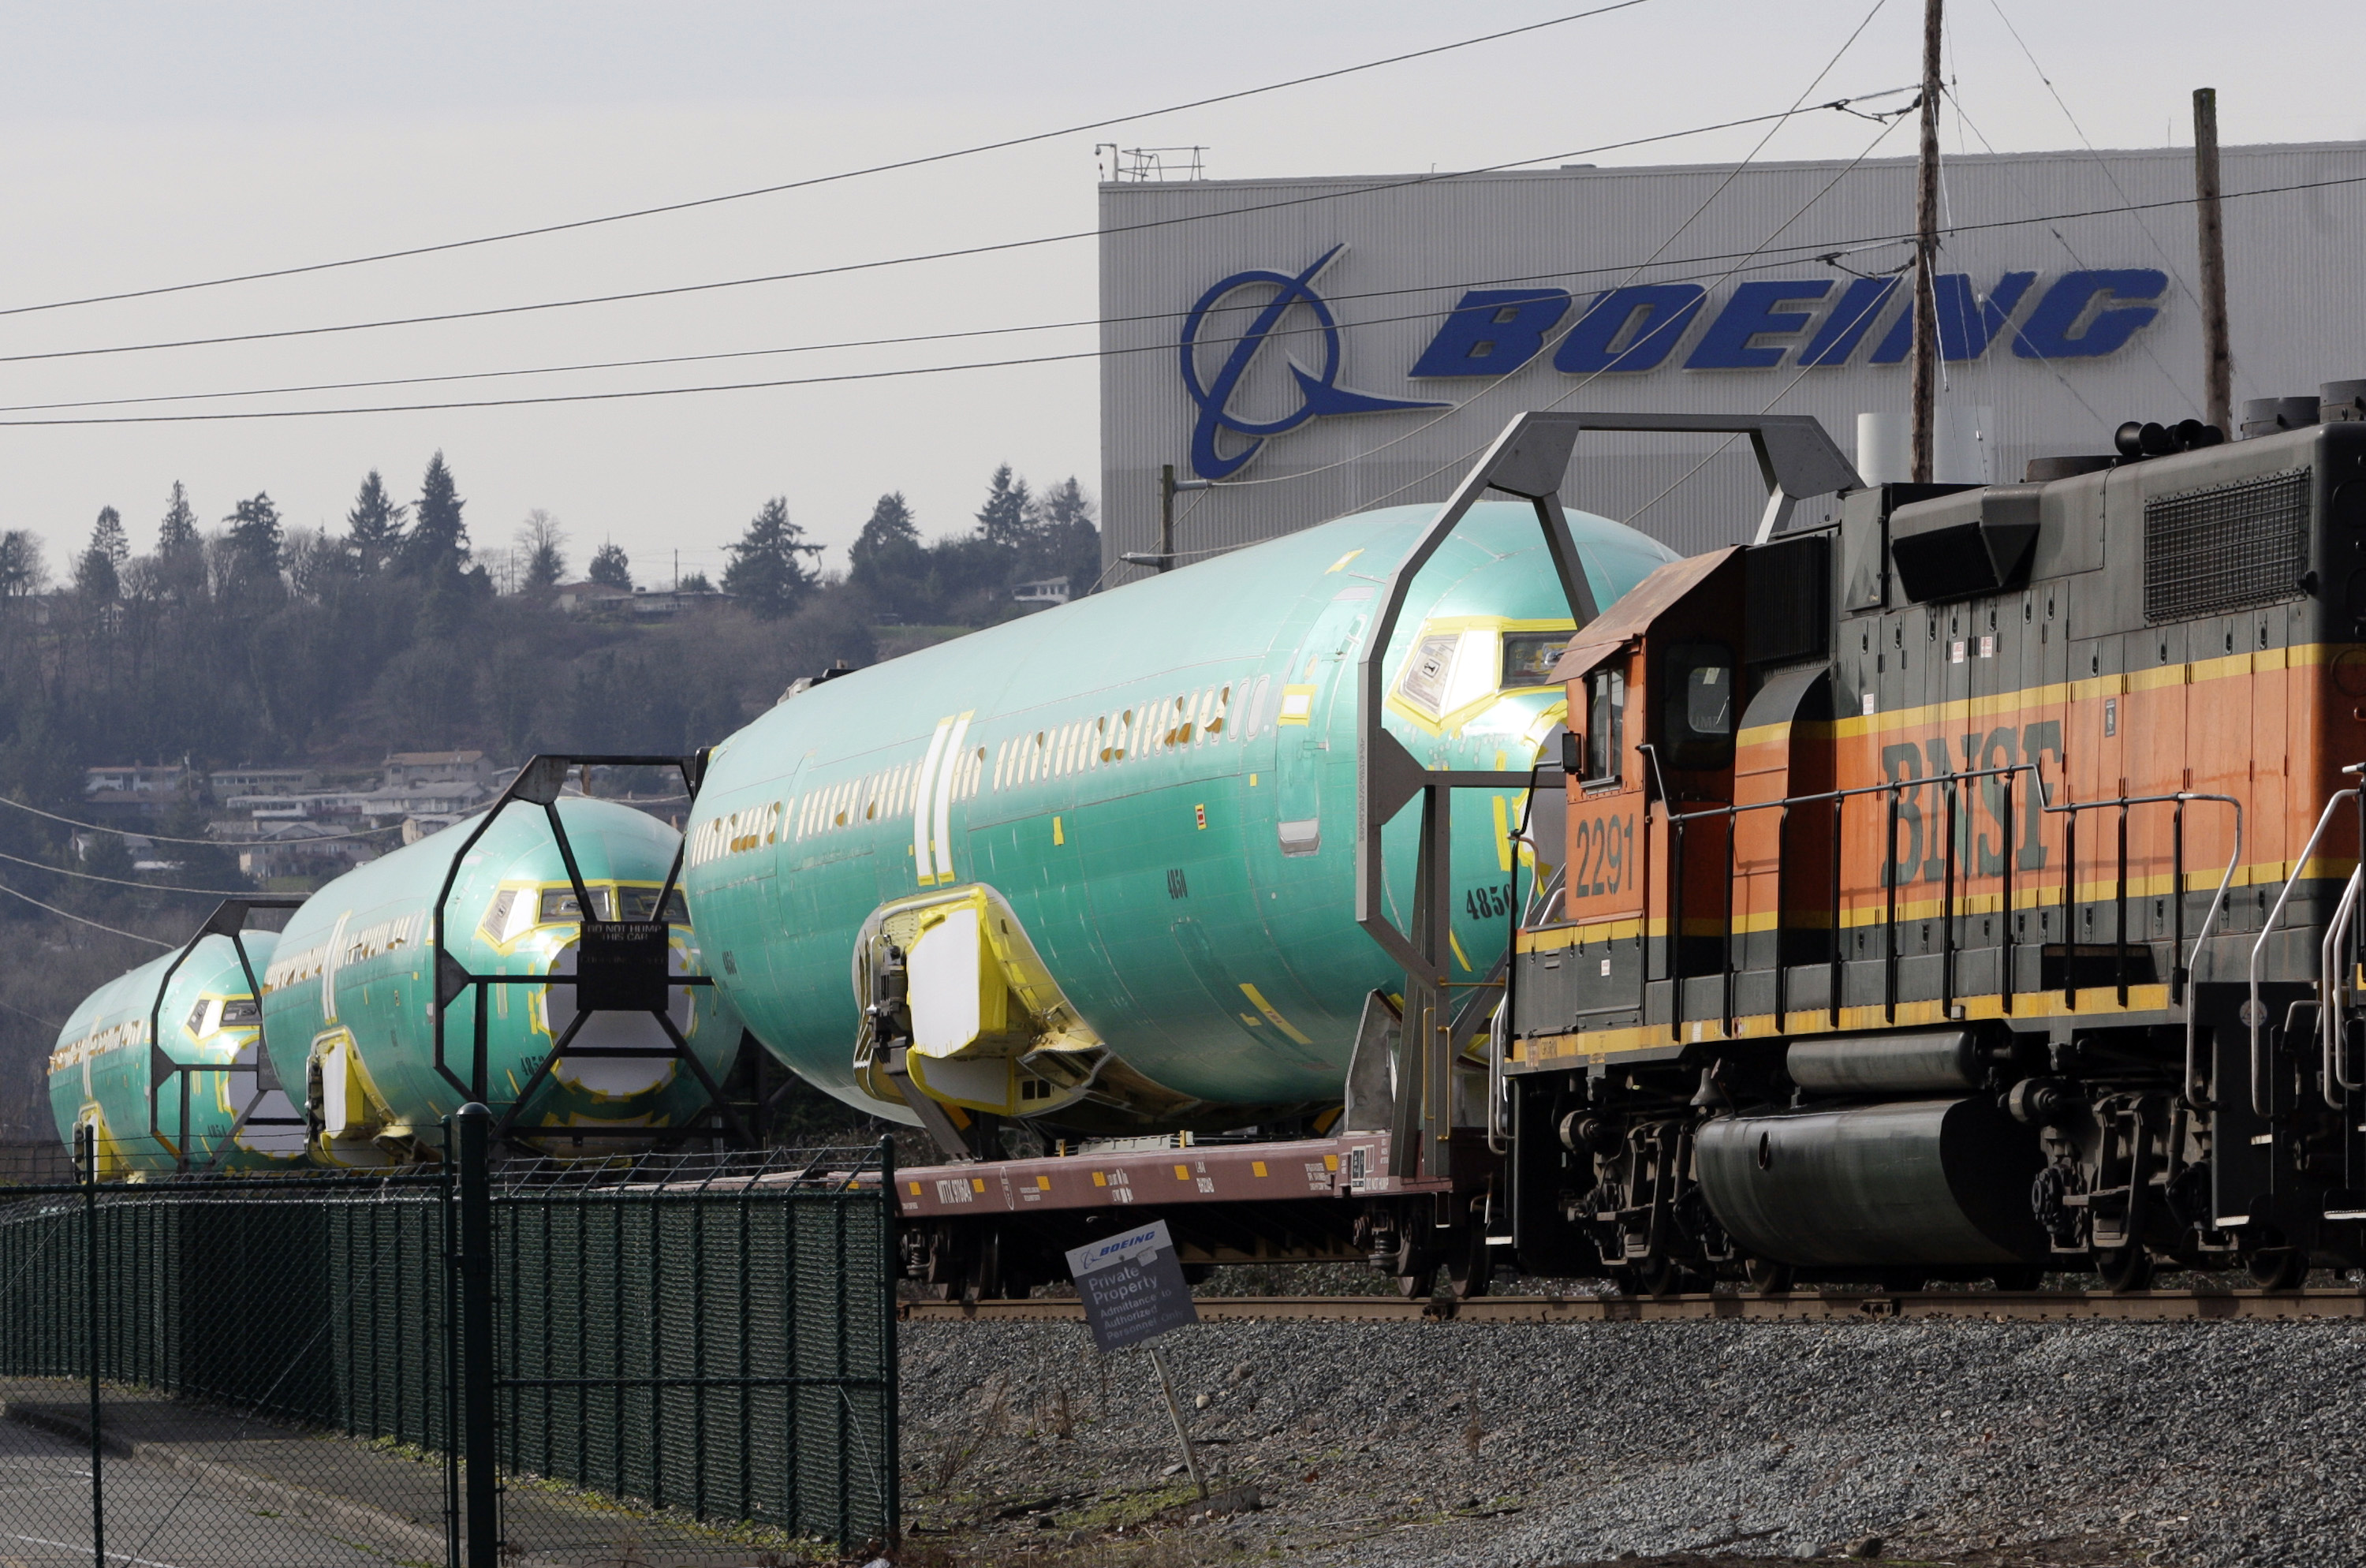 Boeing 737 fuselages are delivered by BNSF train to a Boeing manufacturing site in Renton, Washington